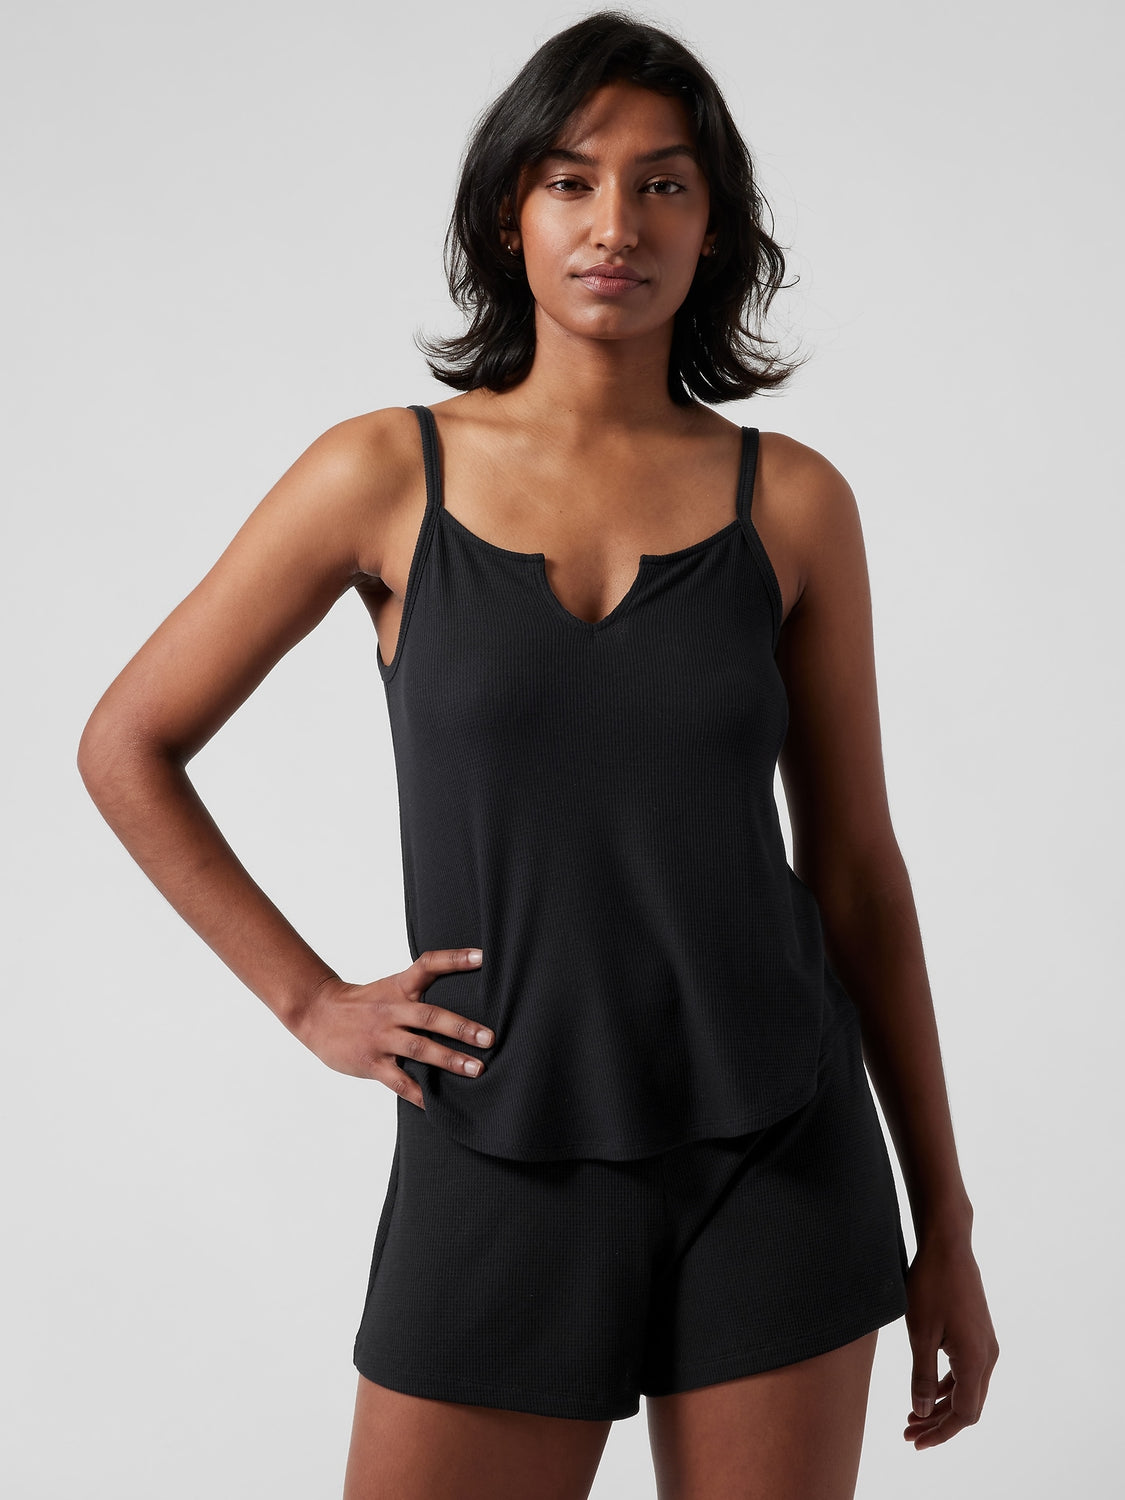 Athleta: Up to 60% Off Sale Apparel + Extra 30% Off: Wind Down